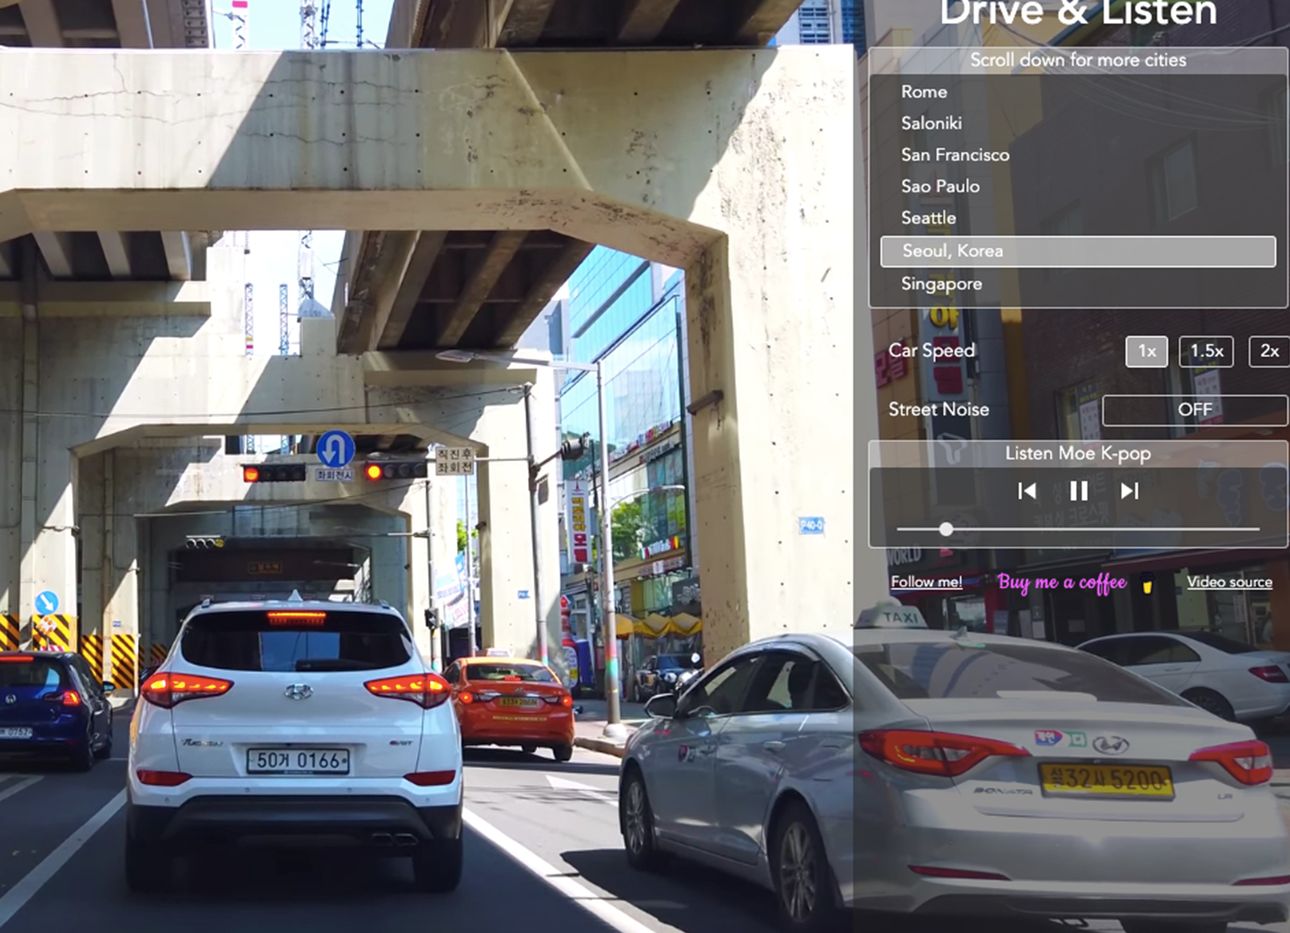 Real-Time Radio and Street Sounds Bring These Virtual Driving